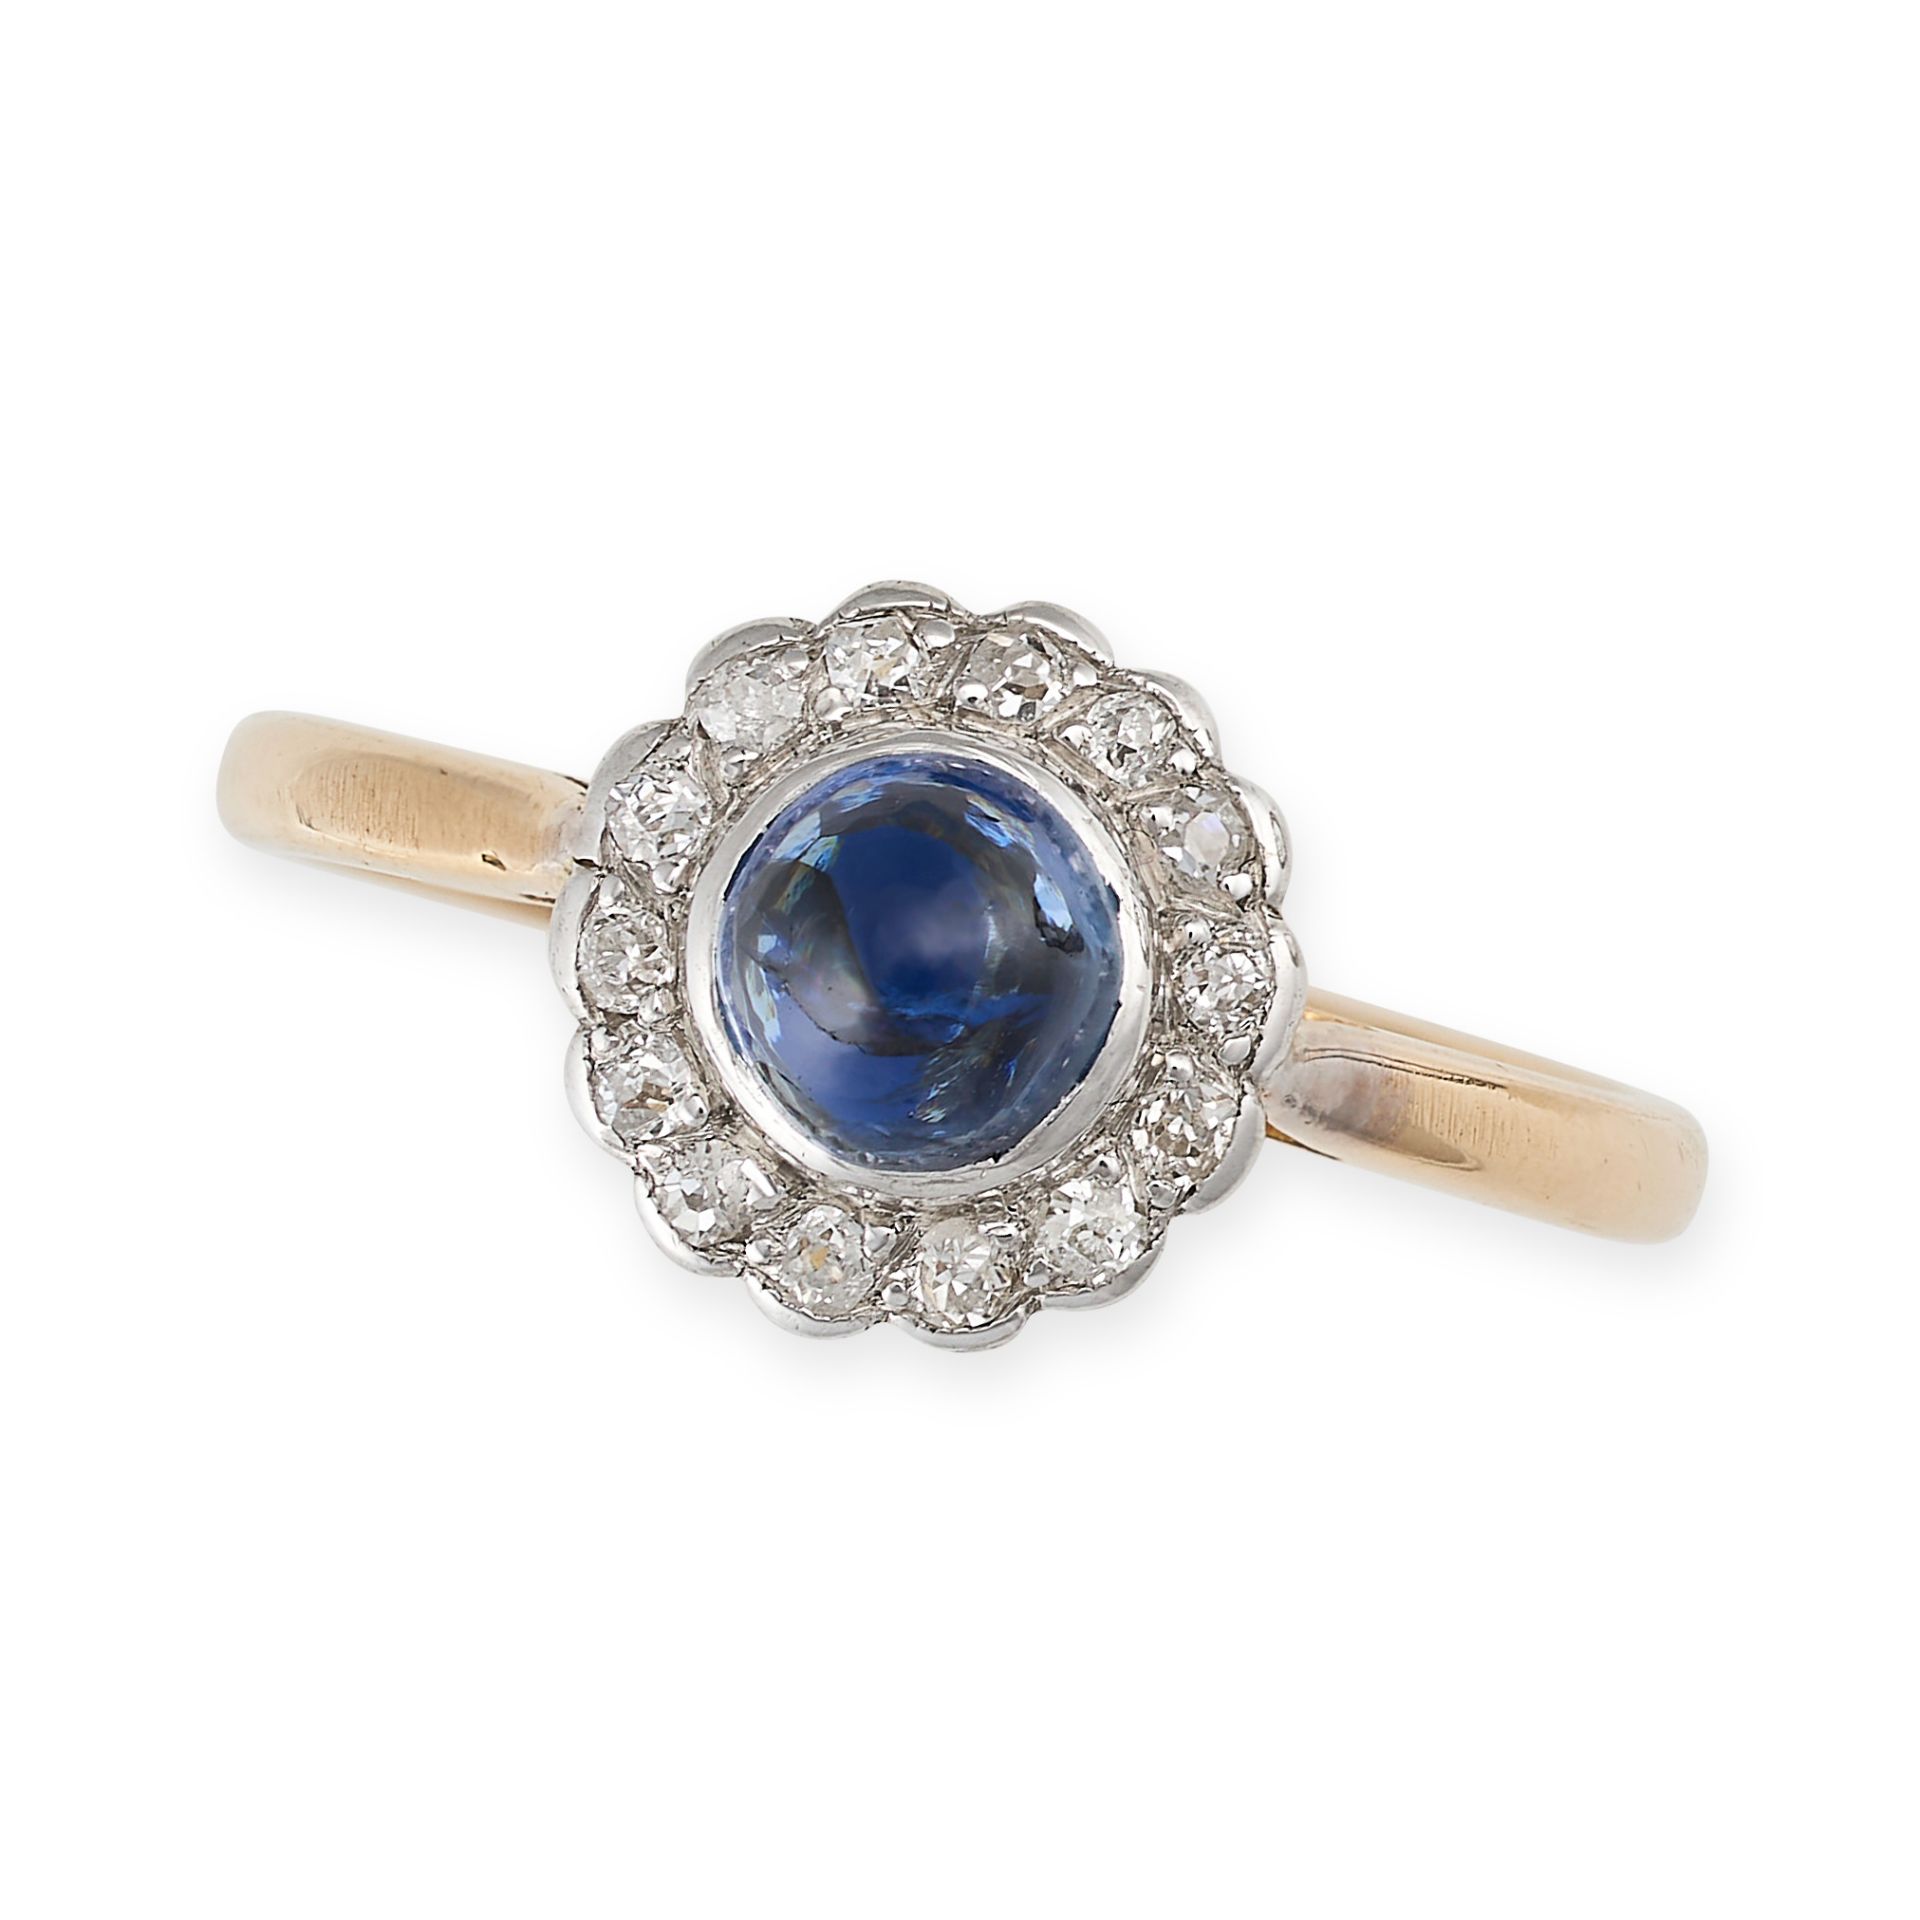 A SAPPHIRE AND DIAMOND CLUSTER DRESS RING in 18ct yellow gold and platinum, set with a round